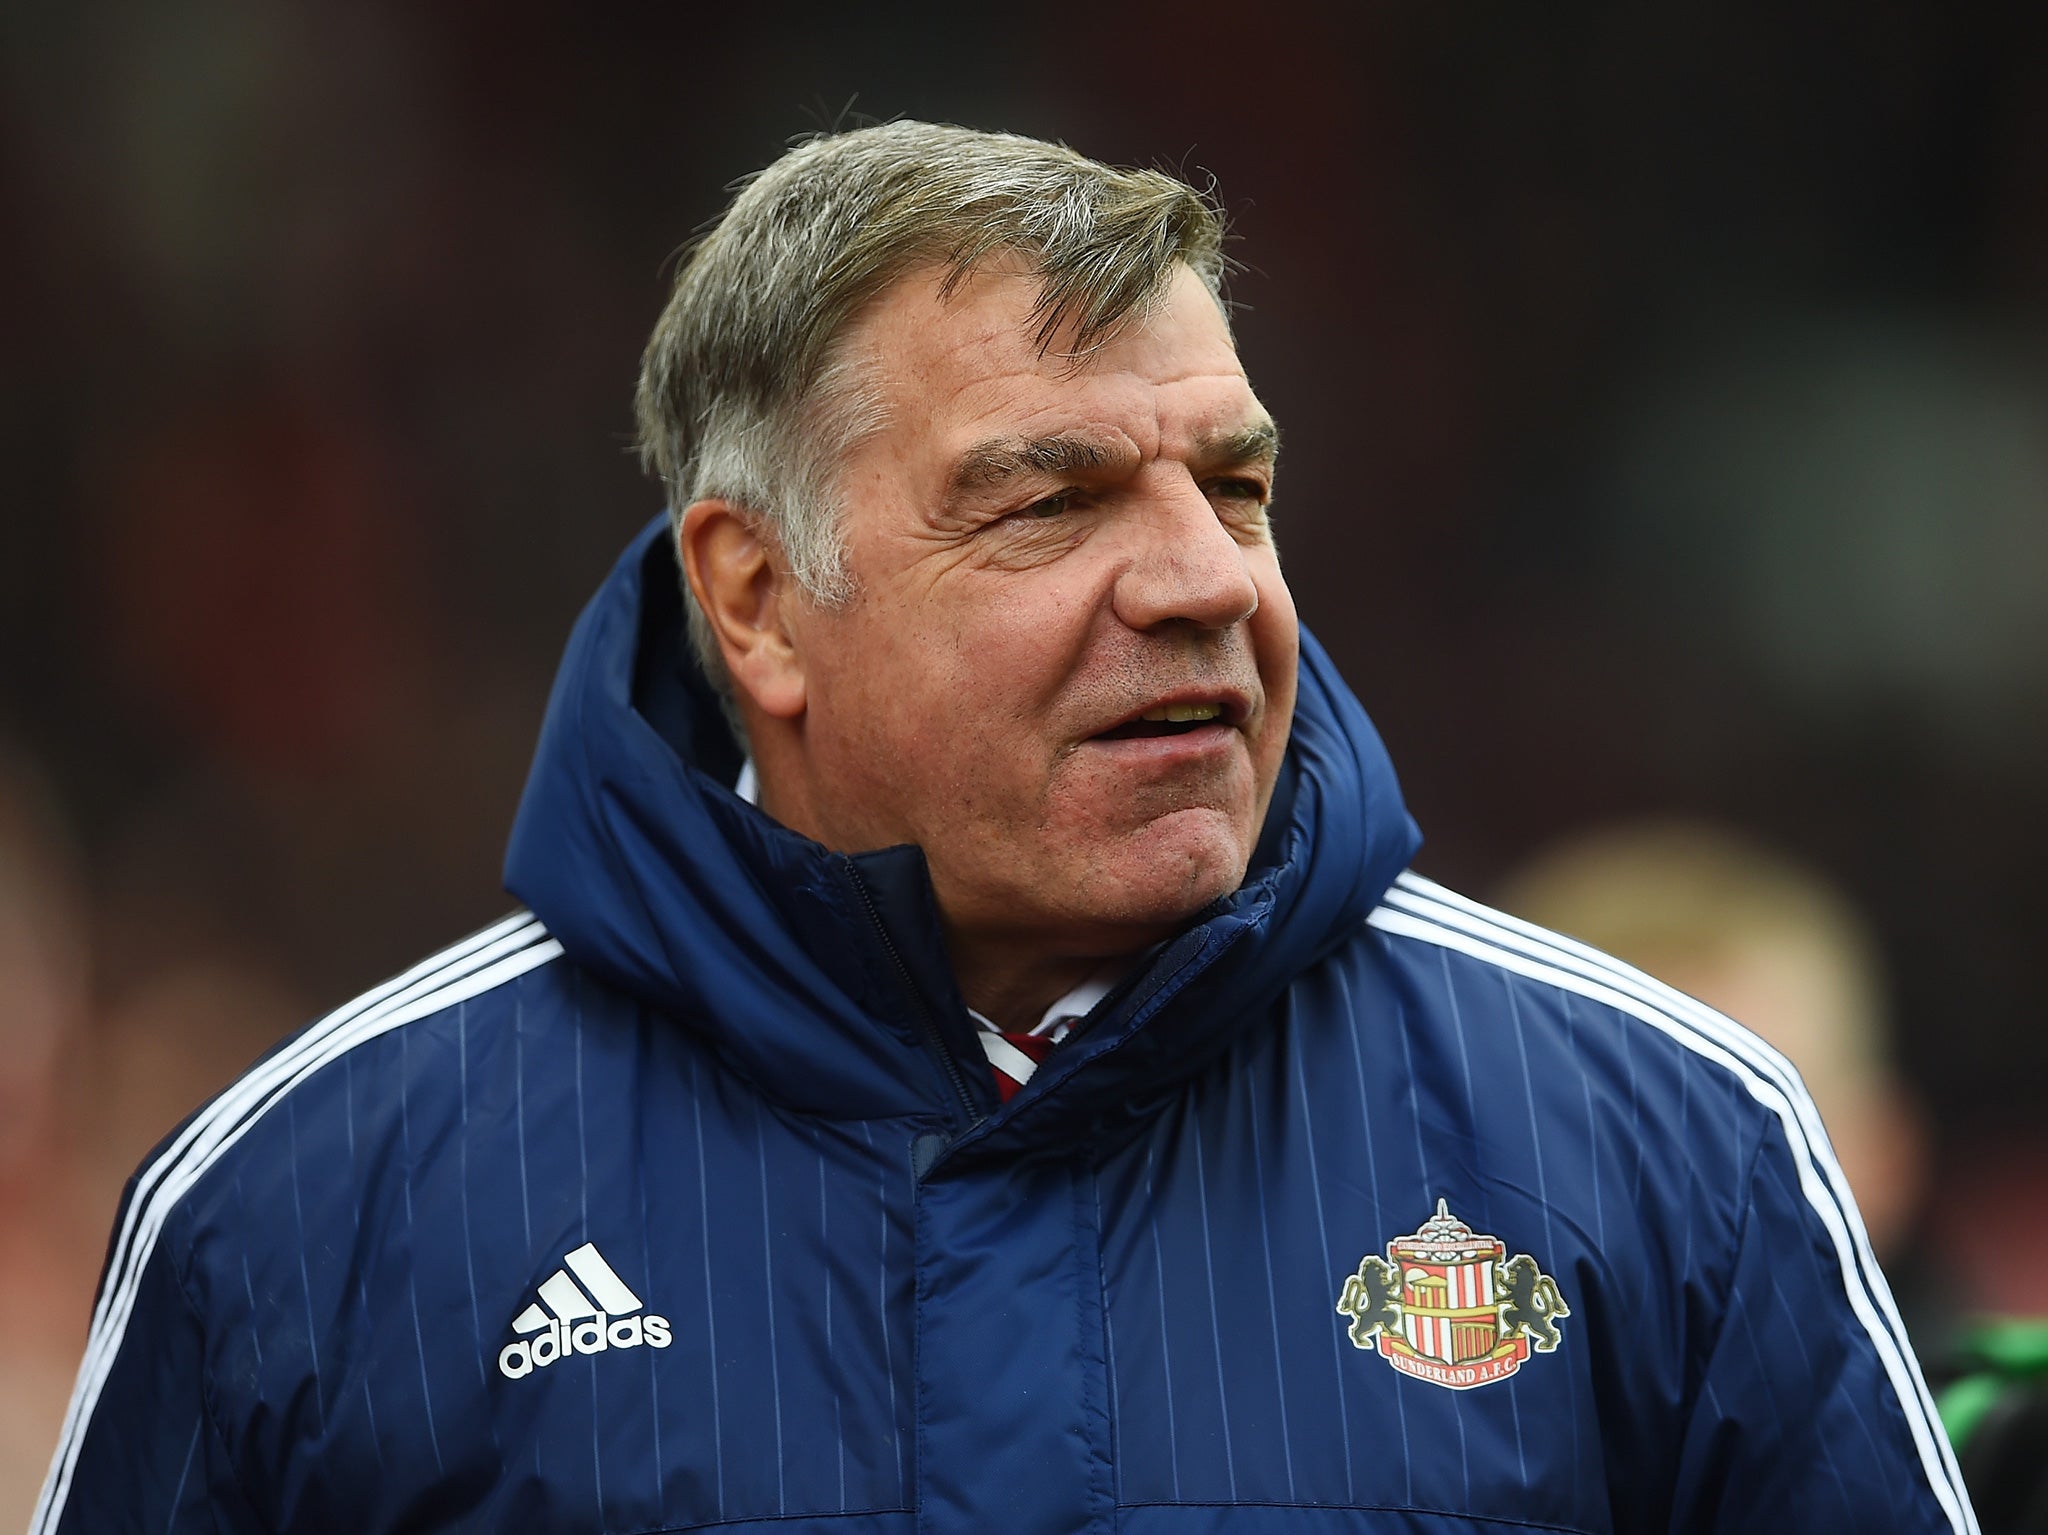 Allardyce and Klinsmann were the only two realistic candidates